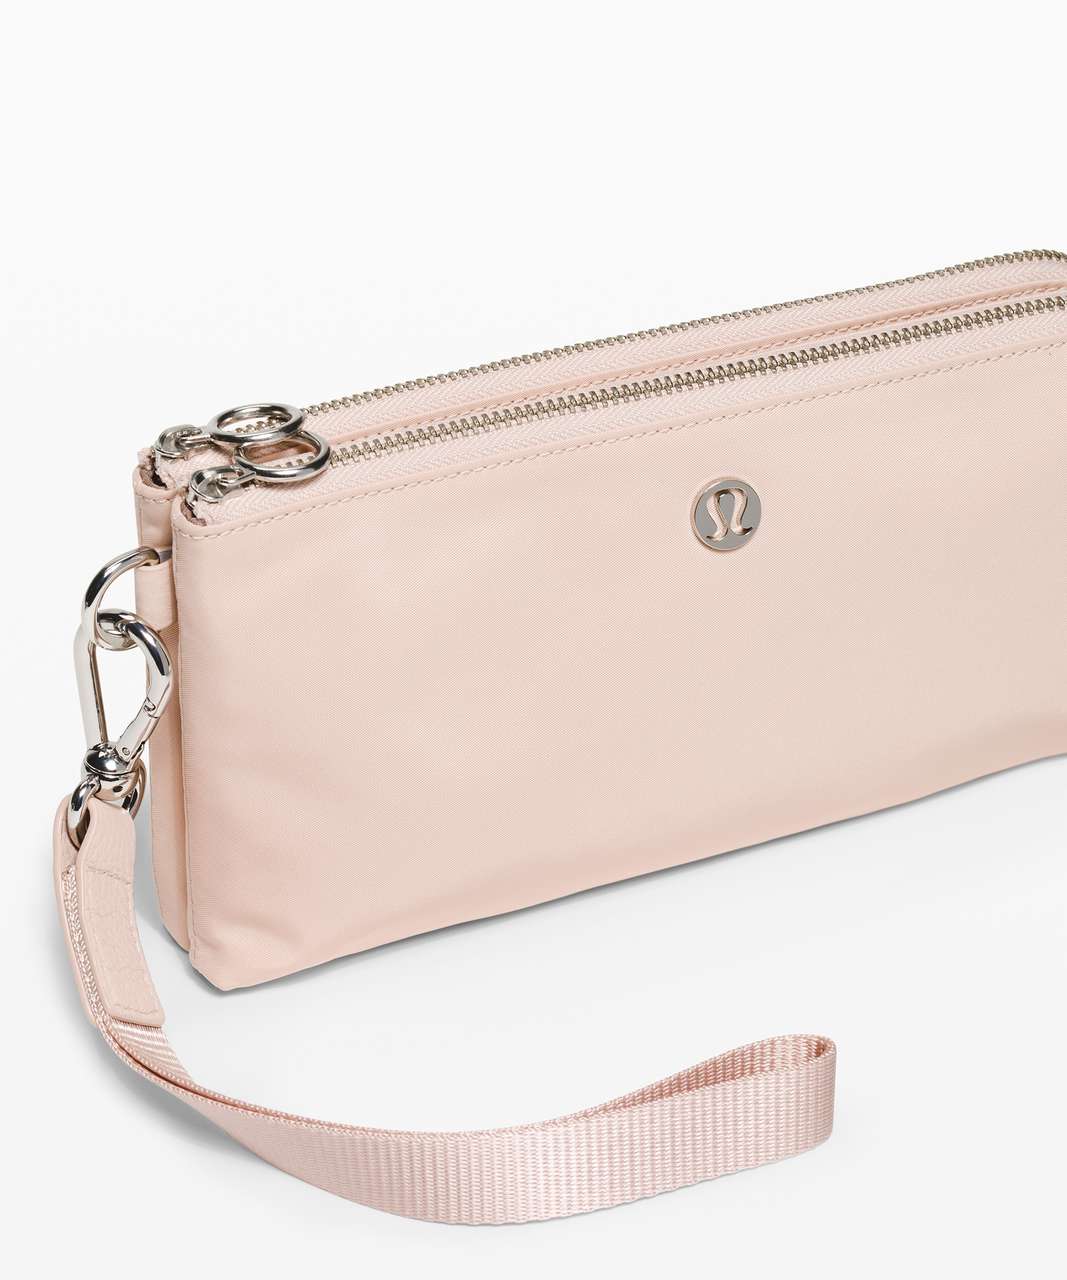 Lululemon Now and Always Pouch - Misty Shell